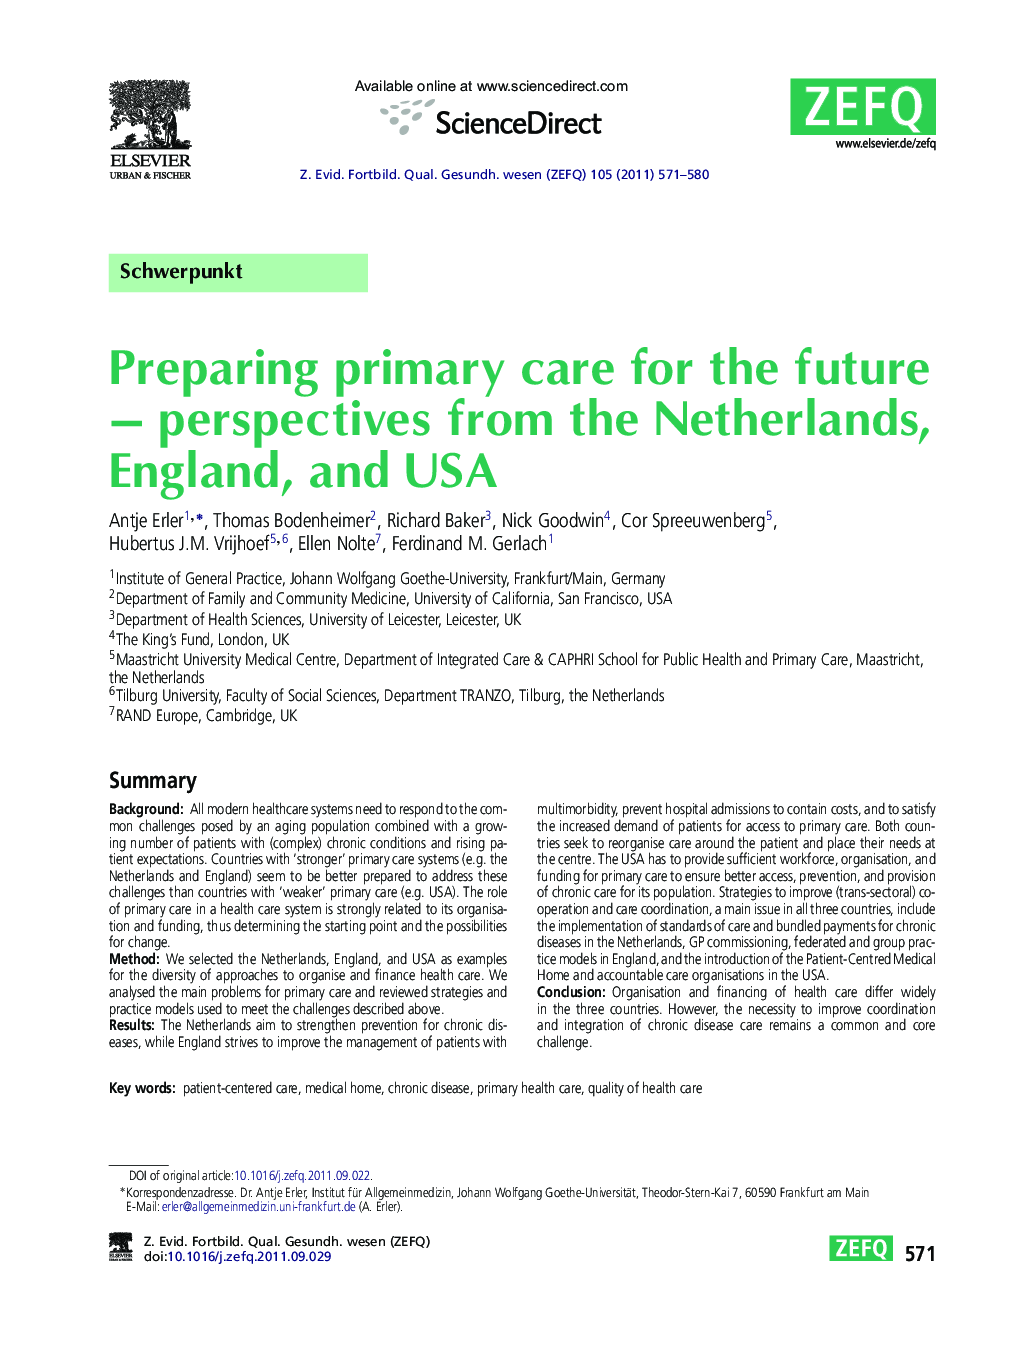 Preparing primary care for the future – perspectives from the Netherlands, England, and USA